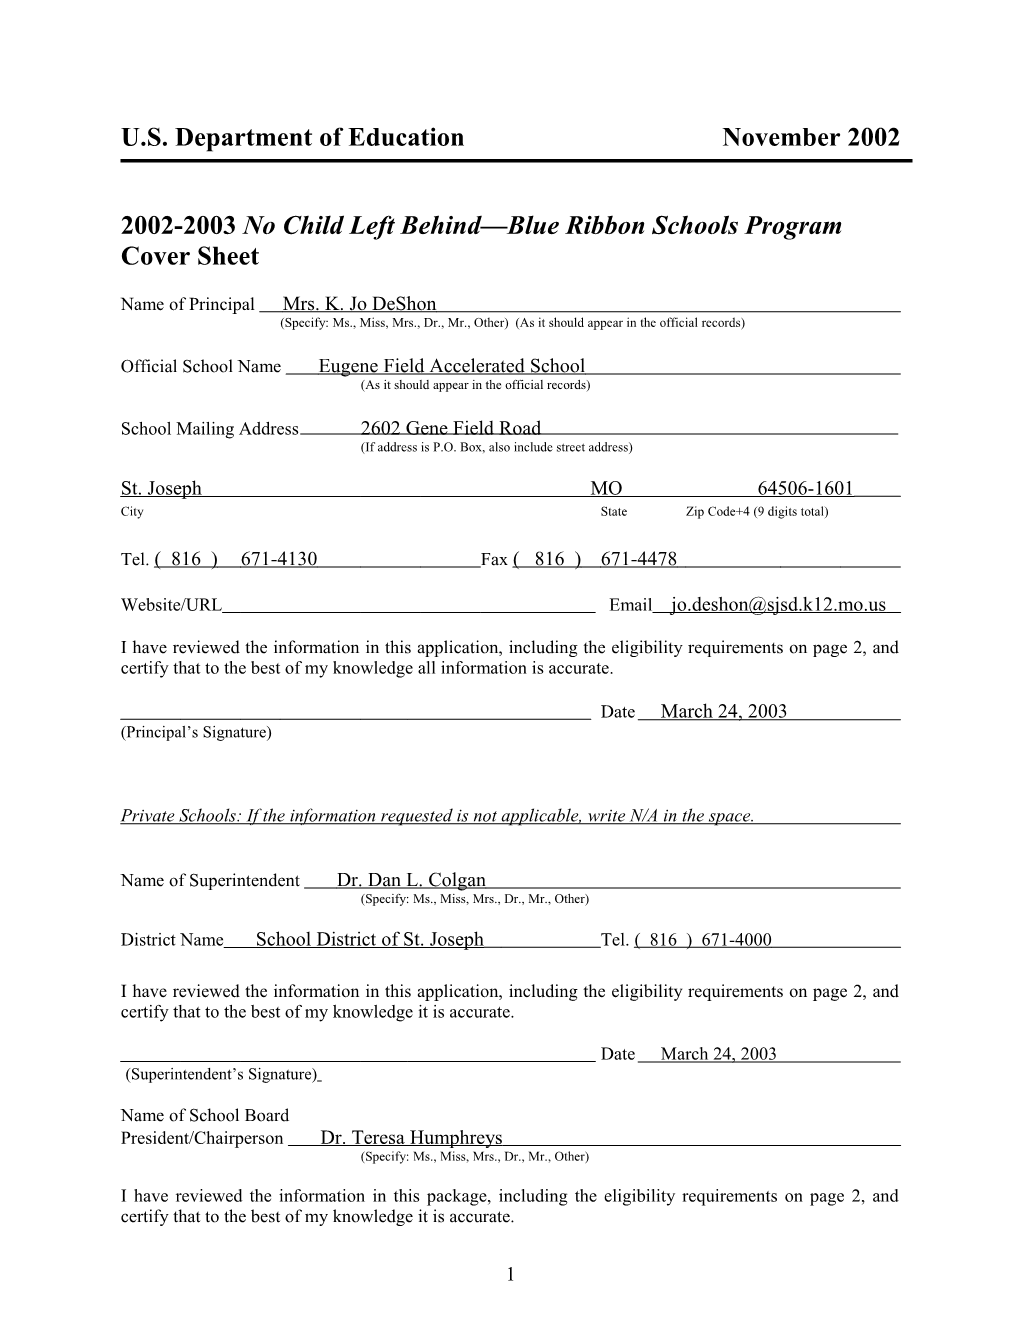 Eugene Field Accelerated School 2003 No Child Left Behind-Blue Ribbon School (Msword)